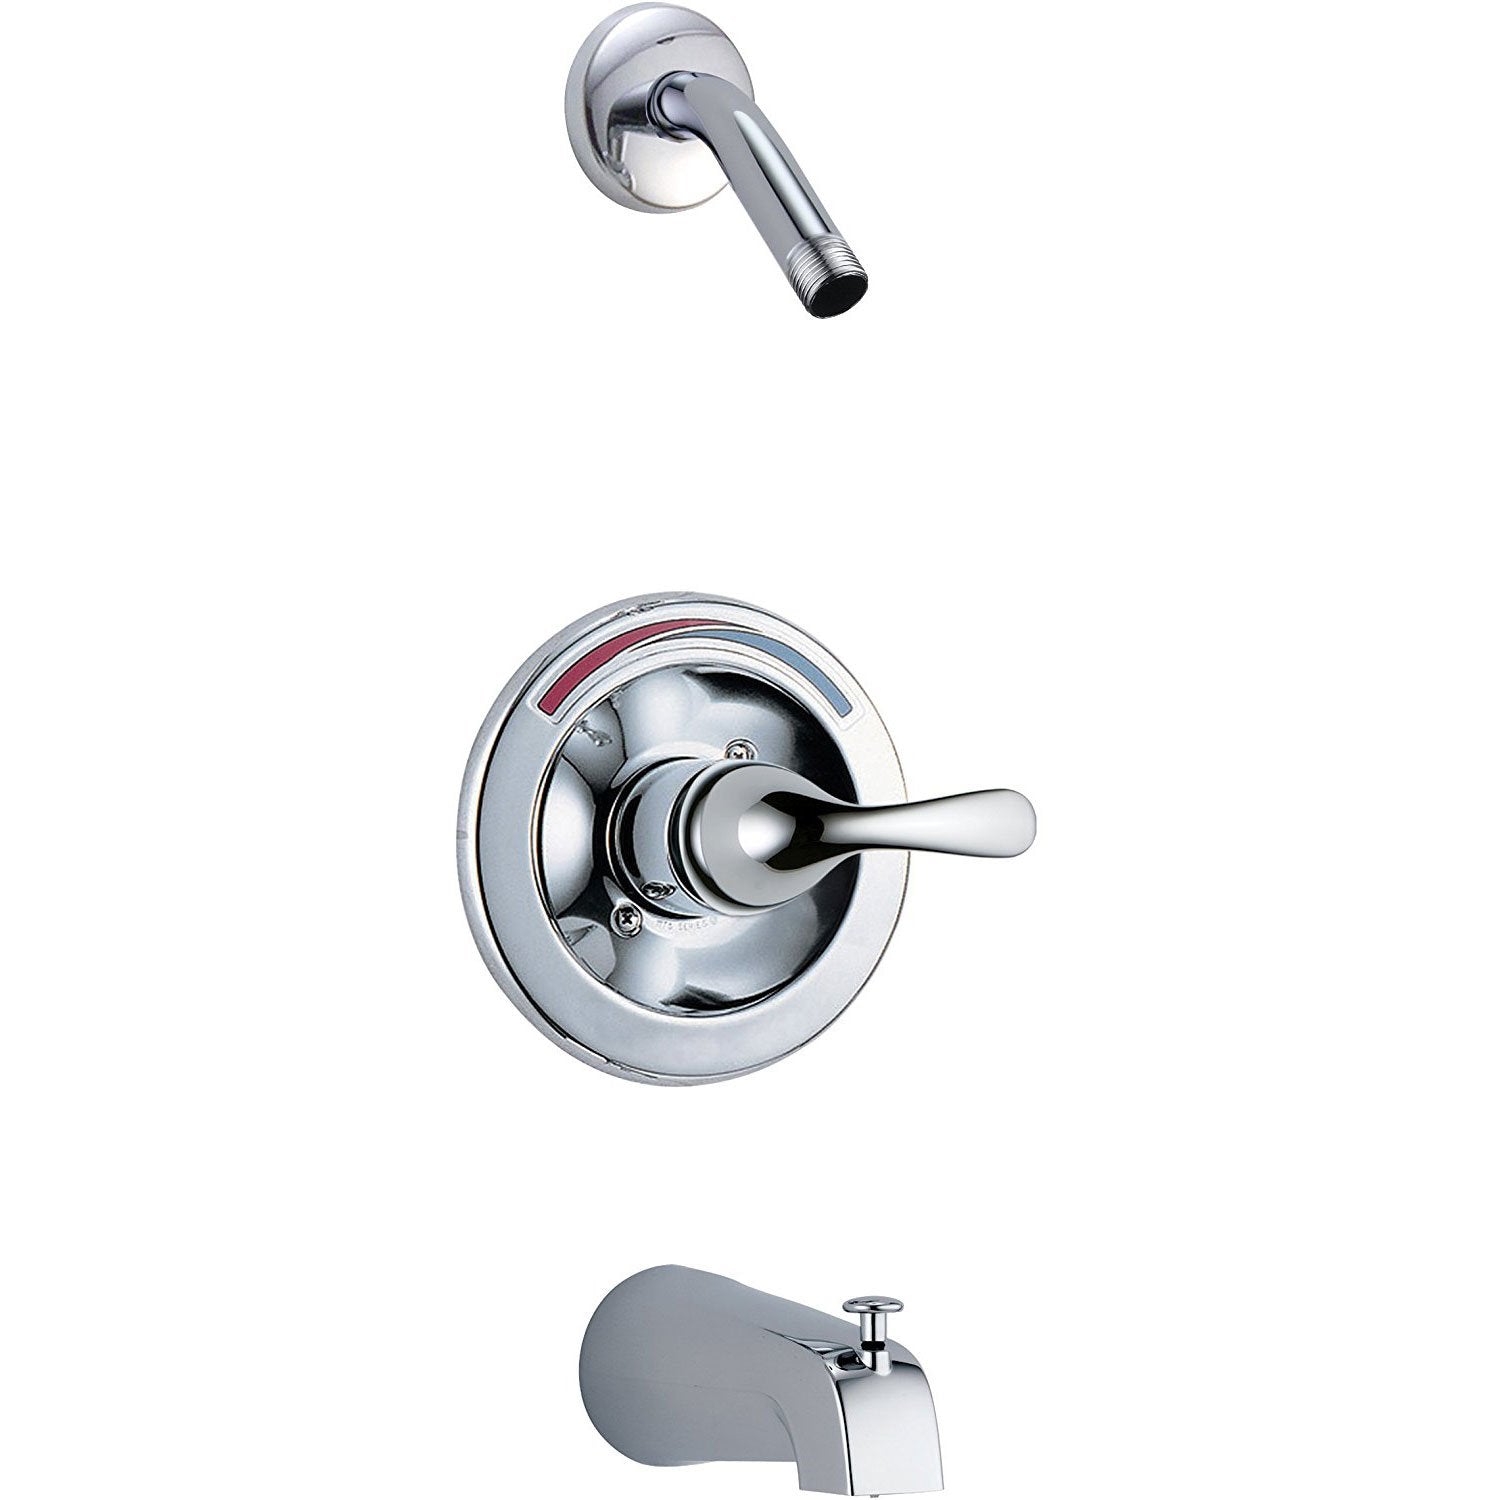 Delta Chrome Finish Monitor 13 Series Classic Style Single Handle Tub and Shower Faucet Trim Kit - Less Showerhead Includes Rough-in Valve with Stops D2514V